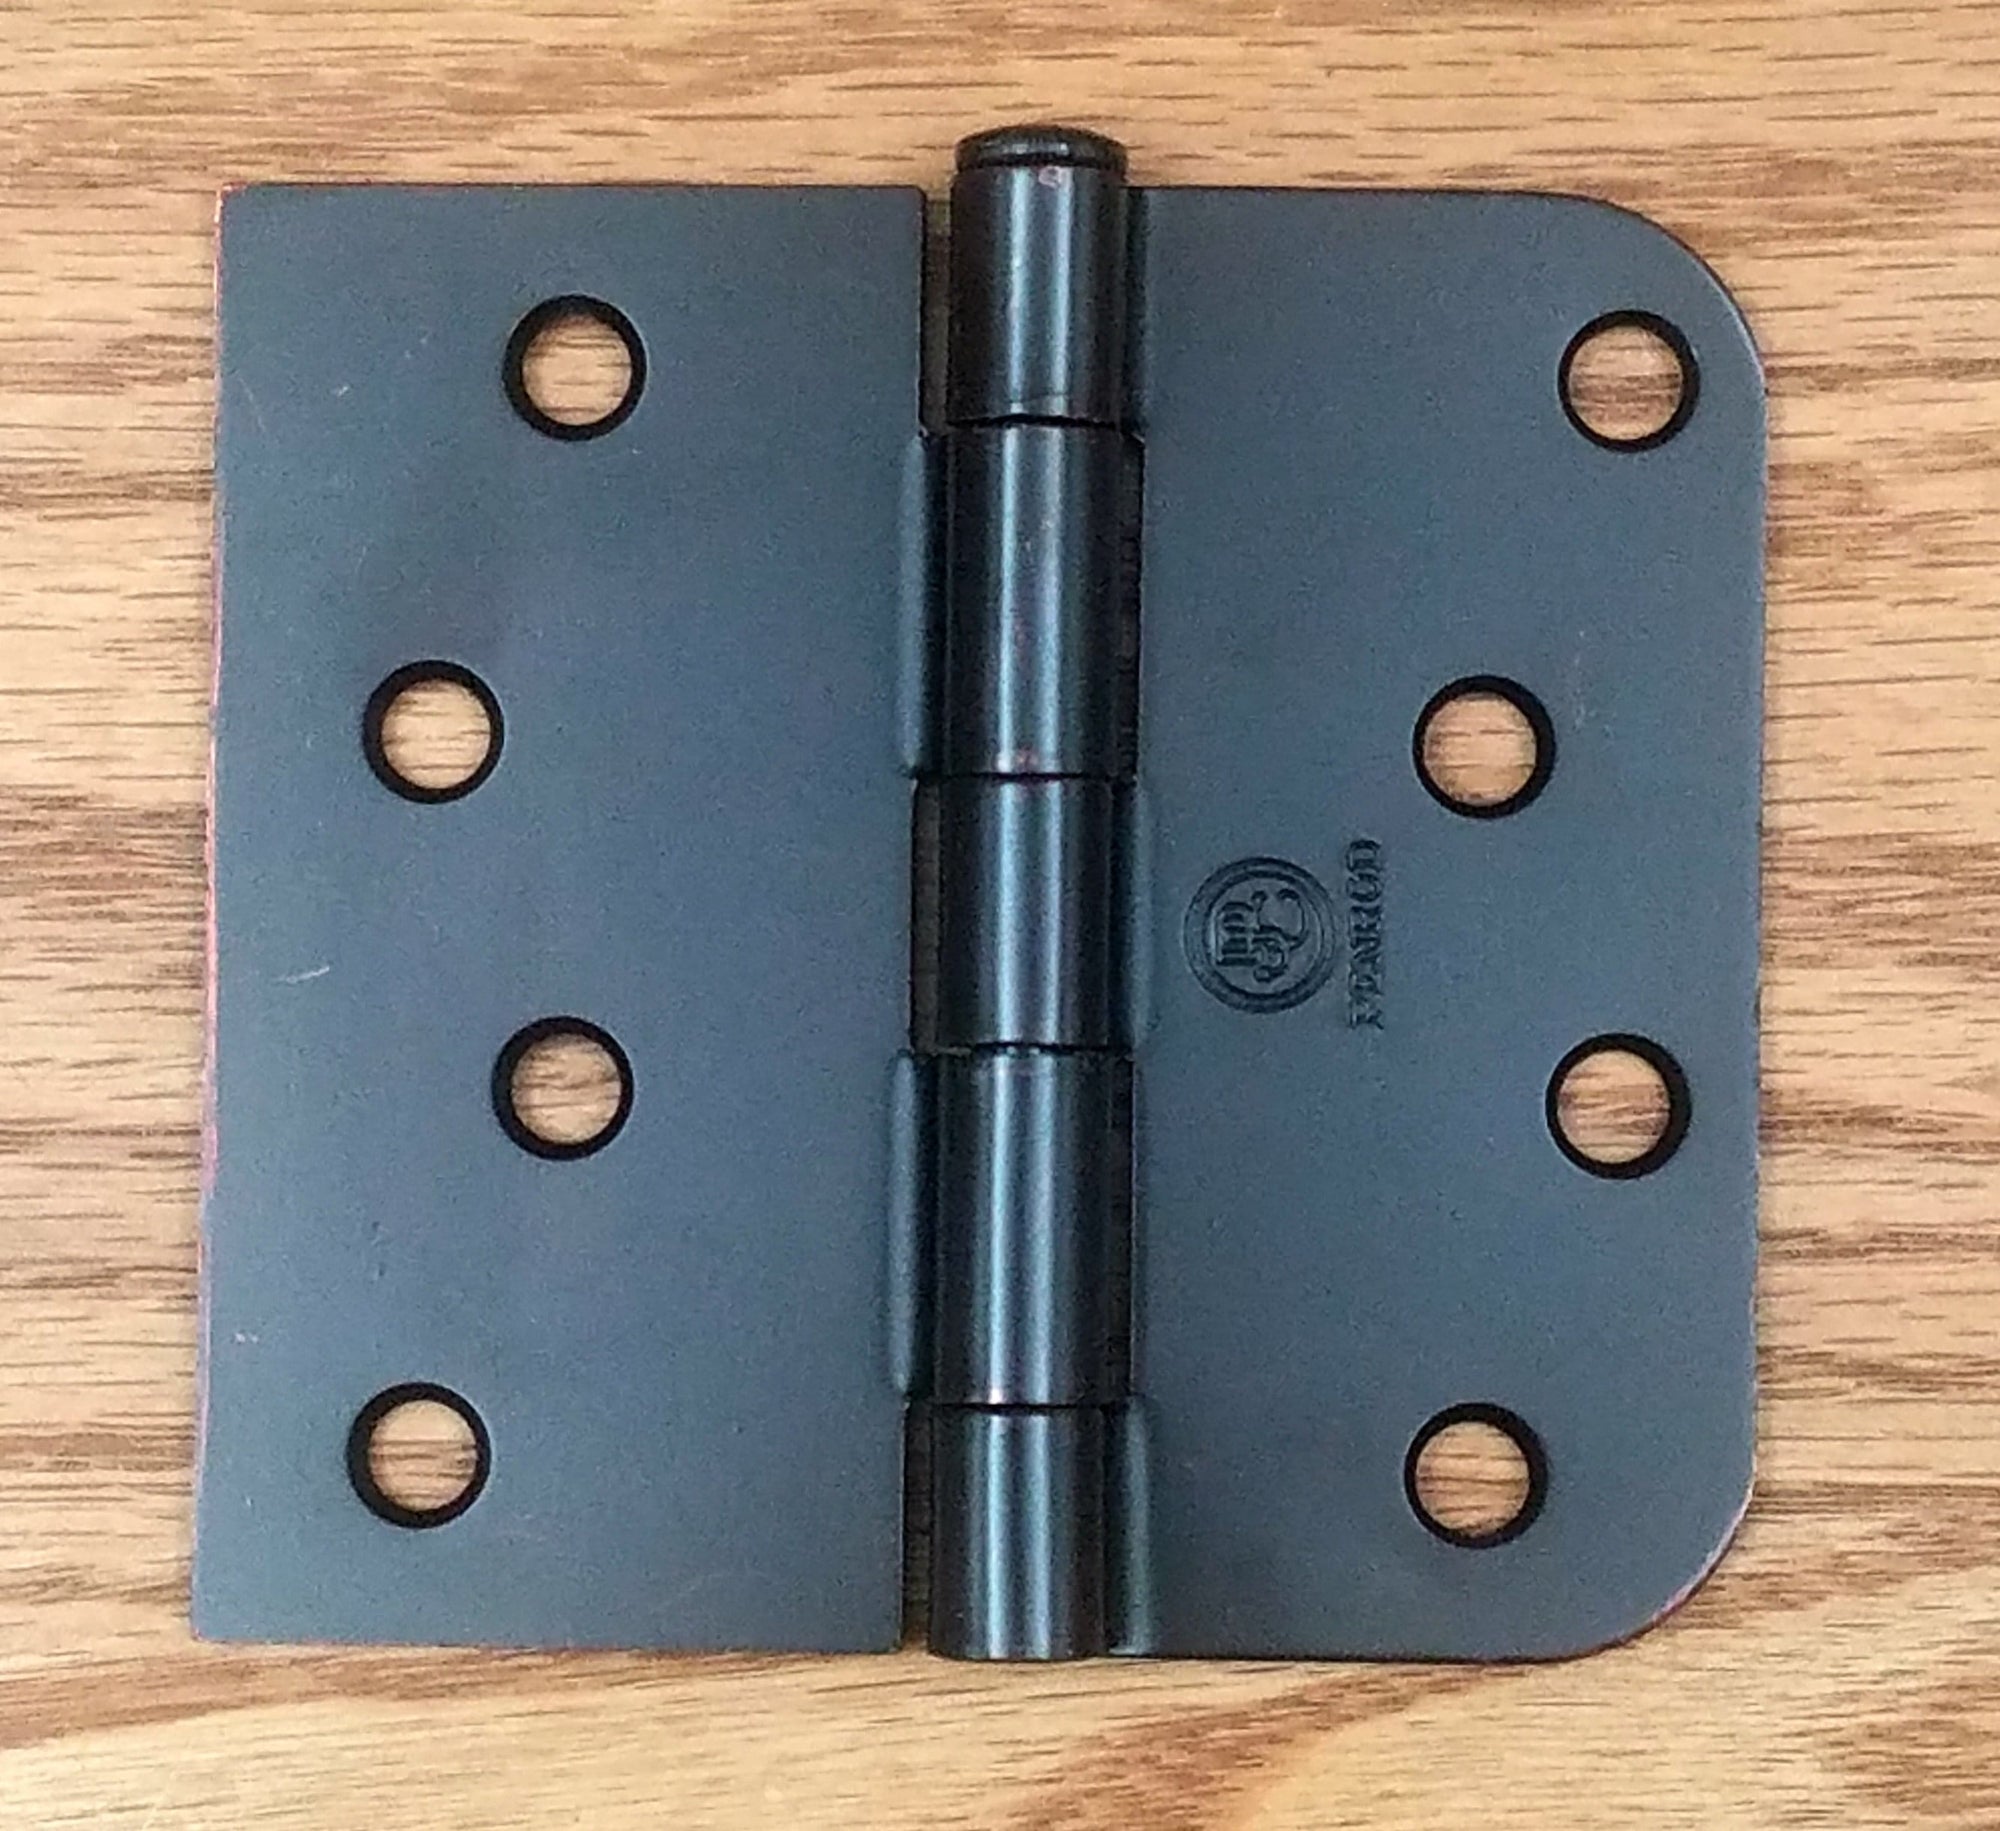 Residential Oil Rubbed Bronze Door Hinges - 4" Inch X 4.25" Inch With 5/8" Inch Square - Plain Bearing - 2 Pack